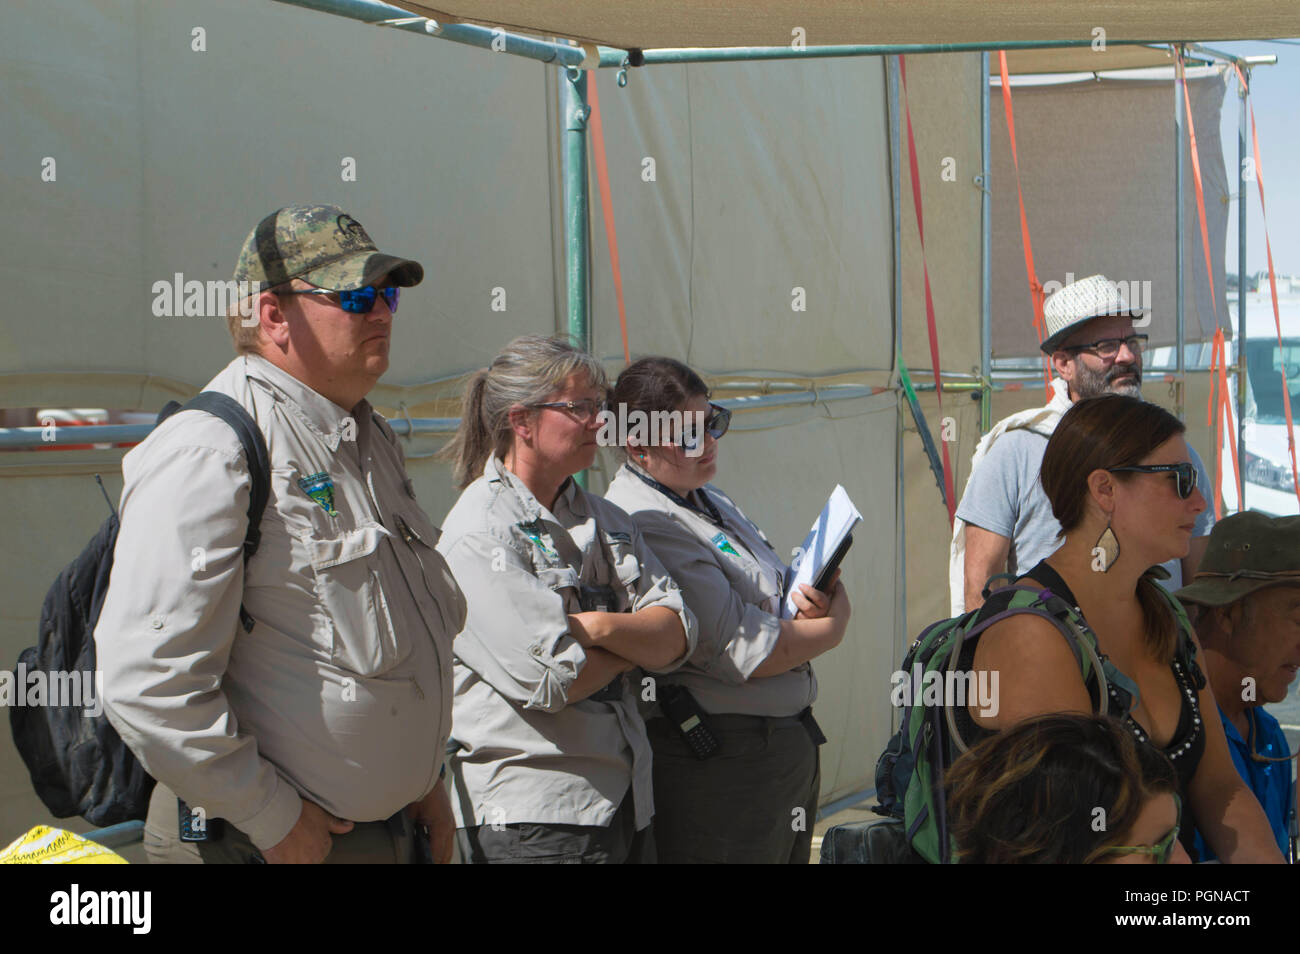 Bureau of Land Management officers meet with the all volunteer Earth Guardians for a pre-event training session on protecting the desert environment at the annual Burning Man counter culture festival in the desert August 23, 2018 near Black Rock, Nevada. Each year 80,000 of people set up a temporary art city in the middle of the desert. Stock Photo